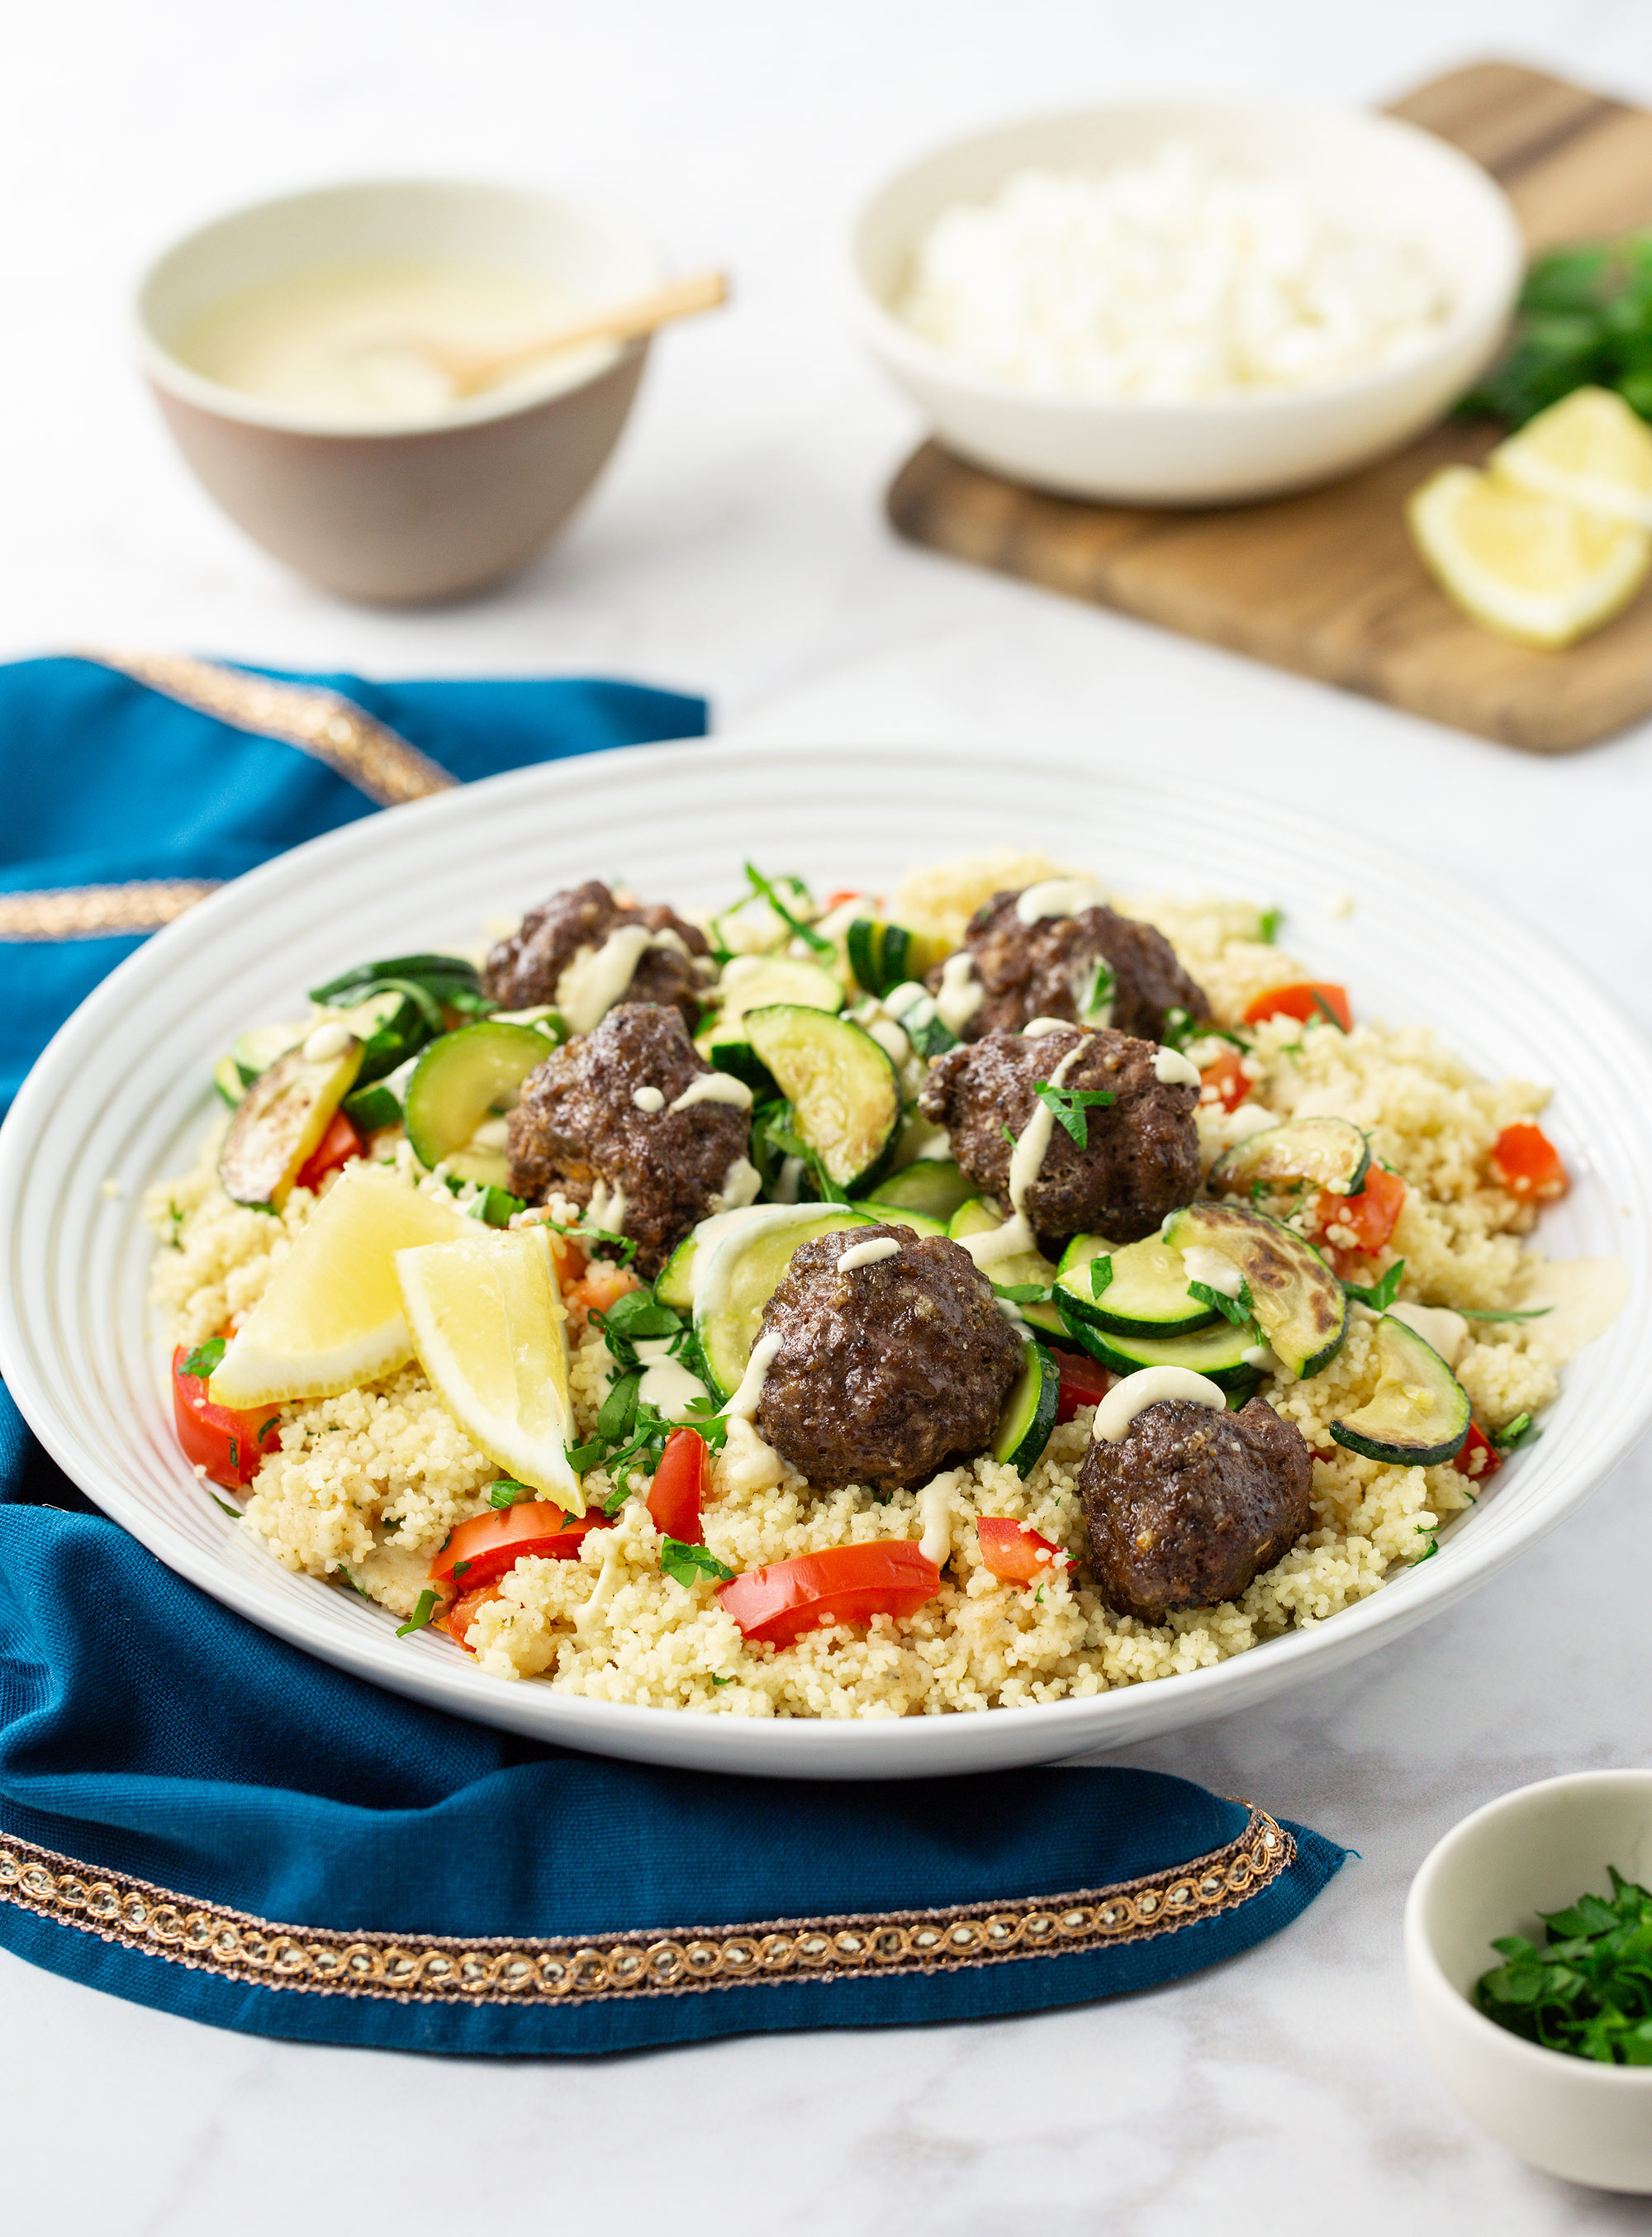 Lebanese Beef & Feta Meatballs with Zucchini, Couscous Tabbouleh and Hummus Drizzle